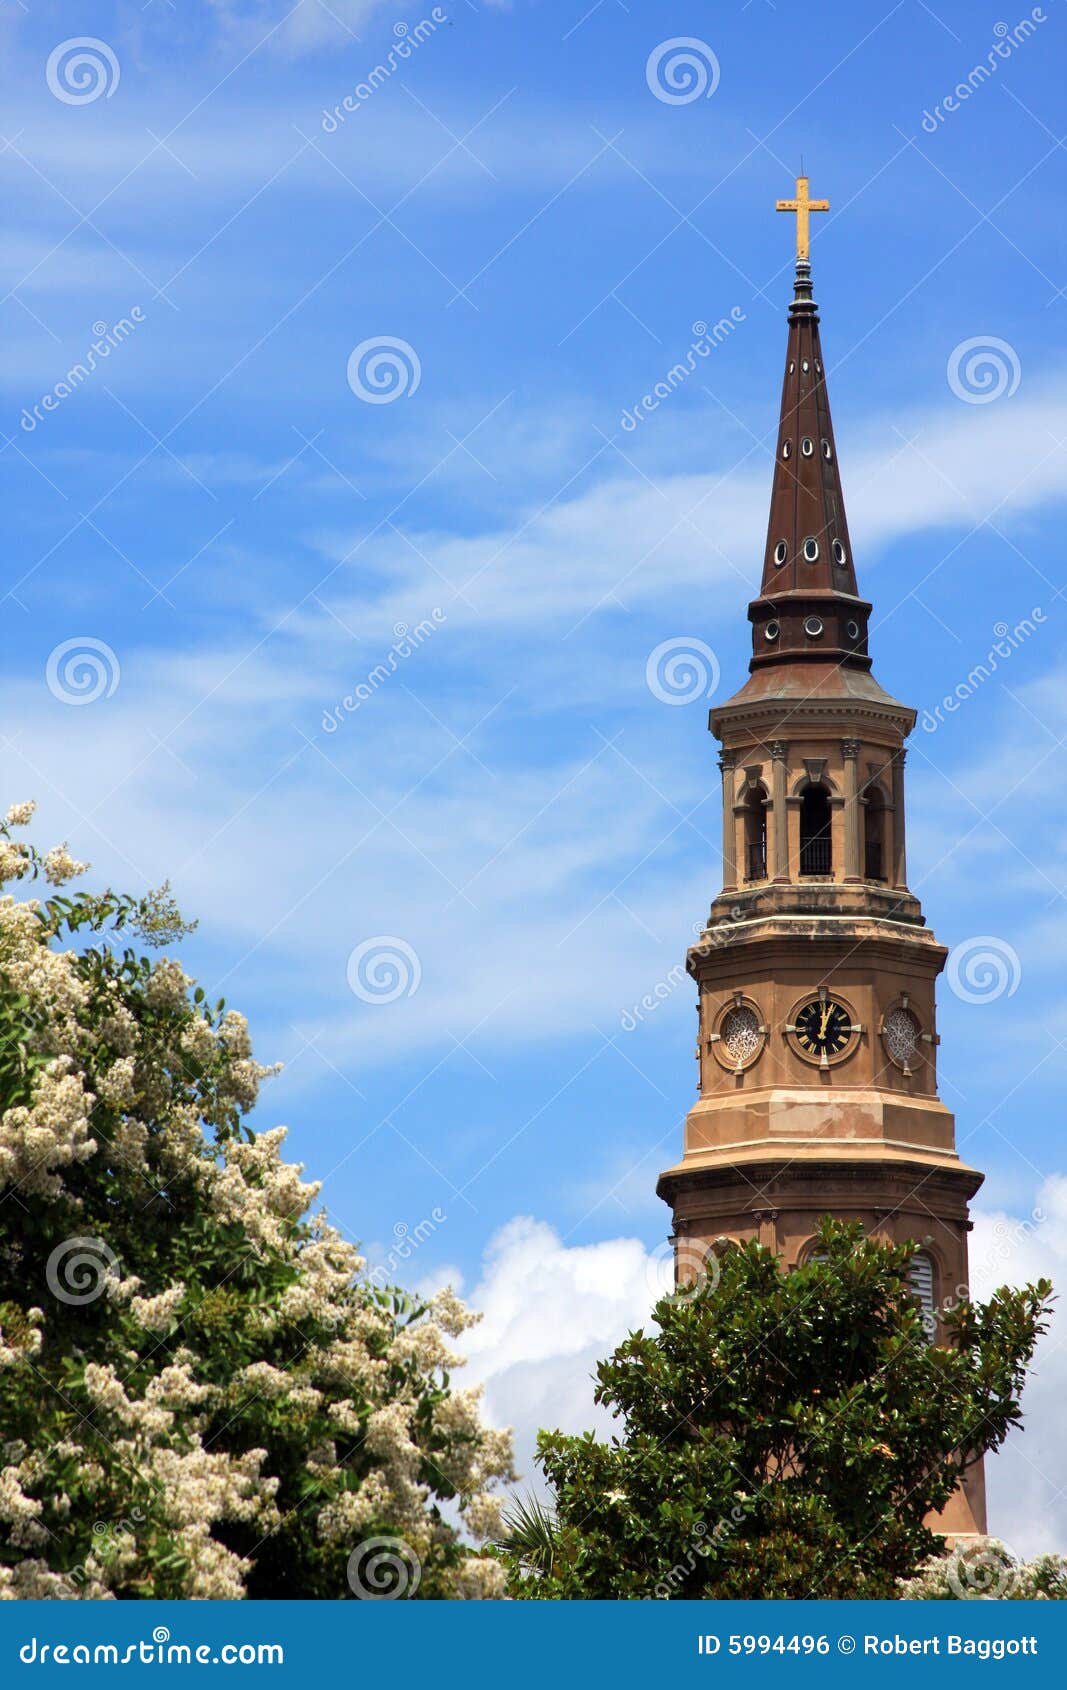 church steeple and flowers